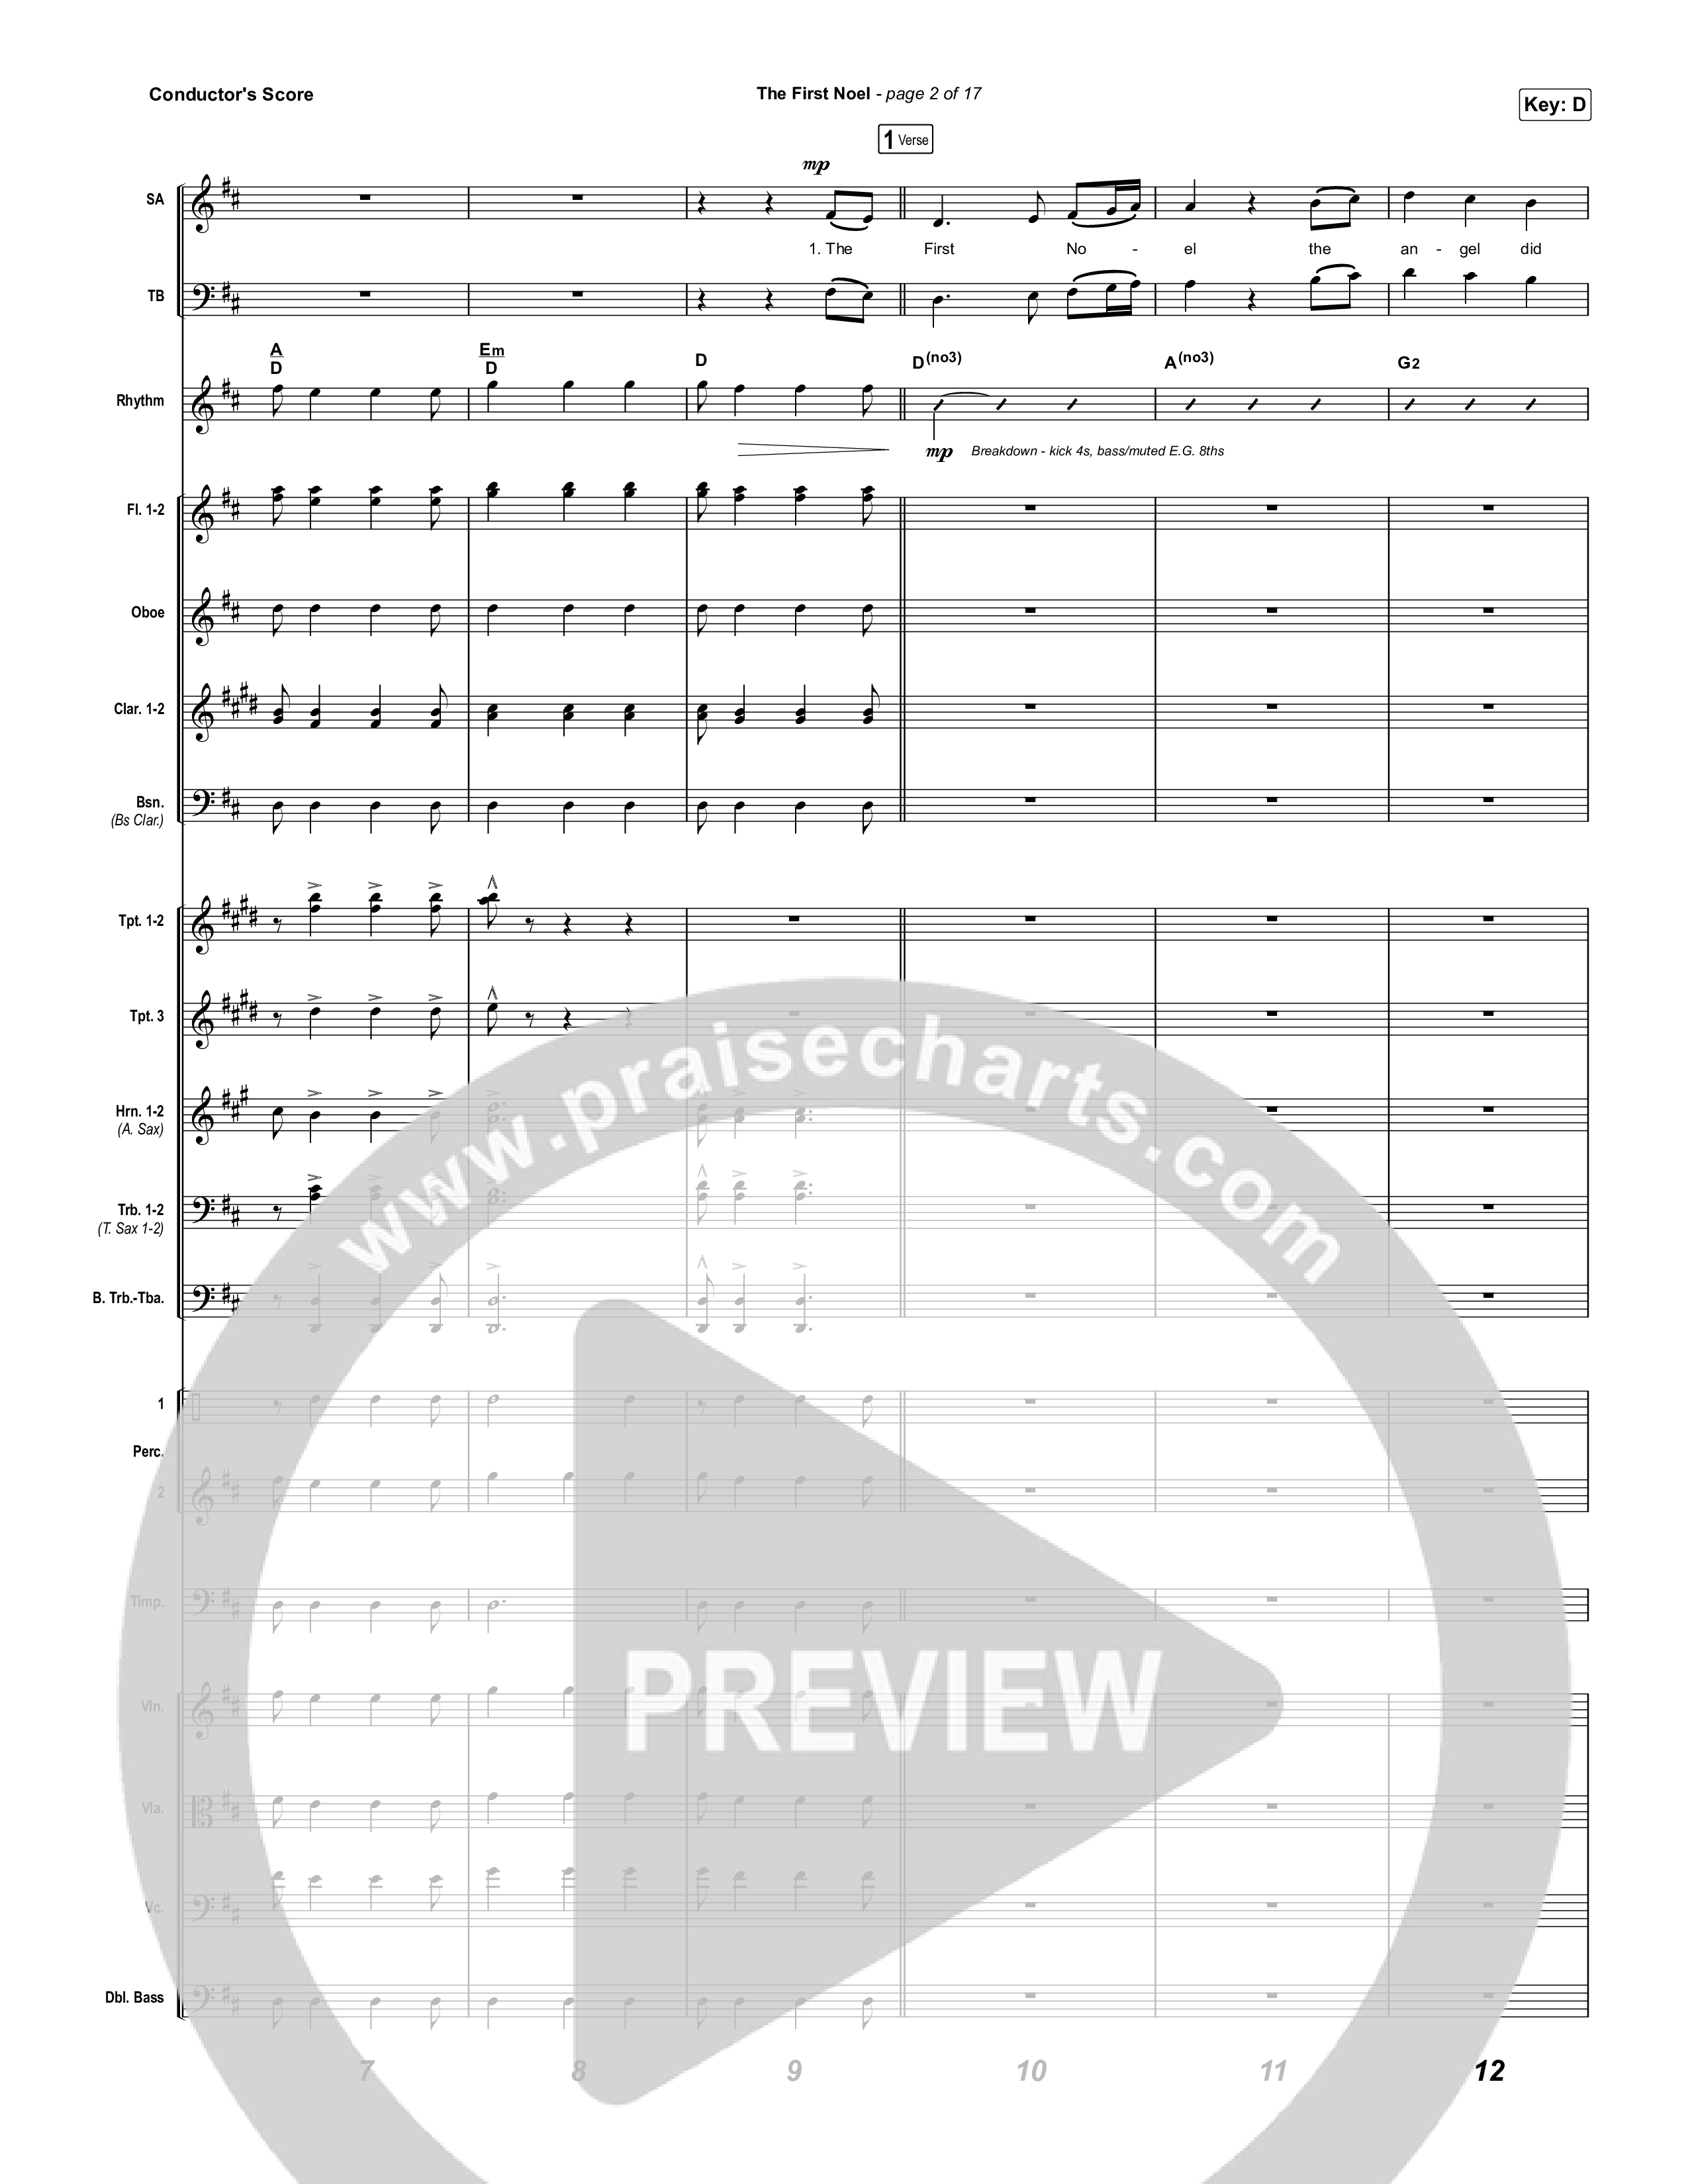 The First Noel Conductor's Score (Highlands Worship)